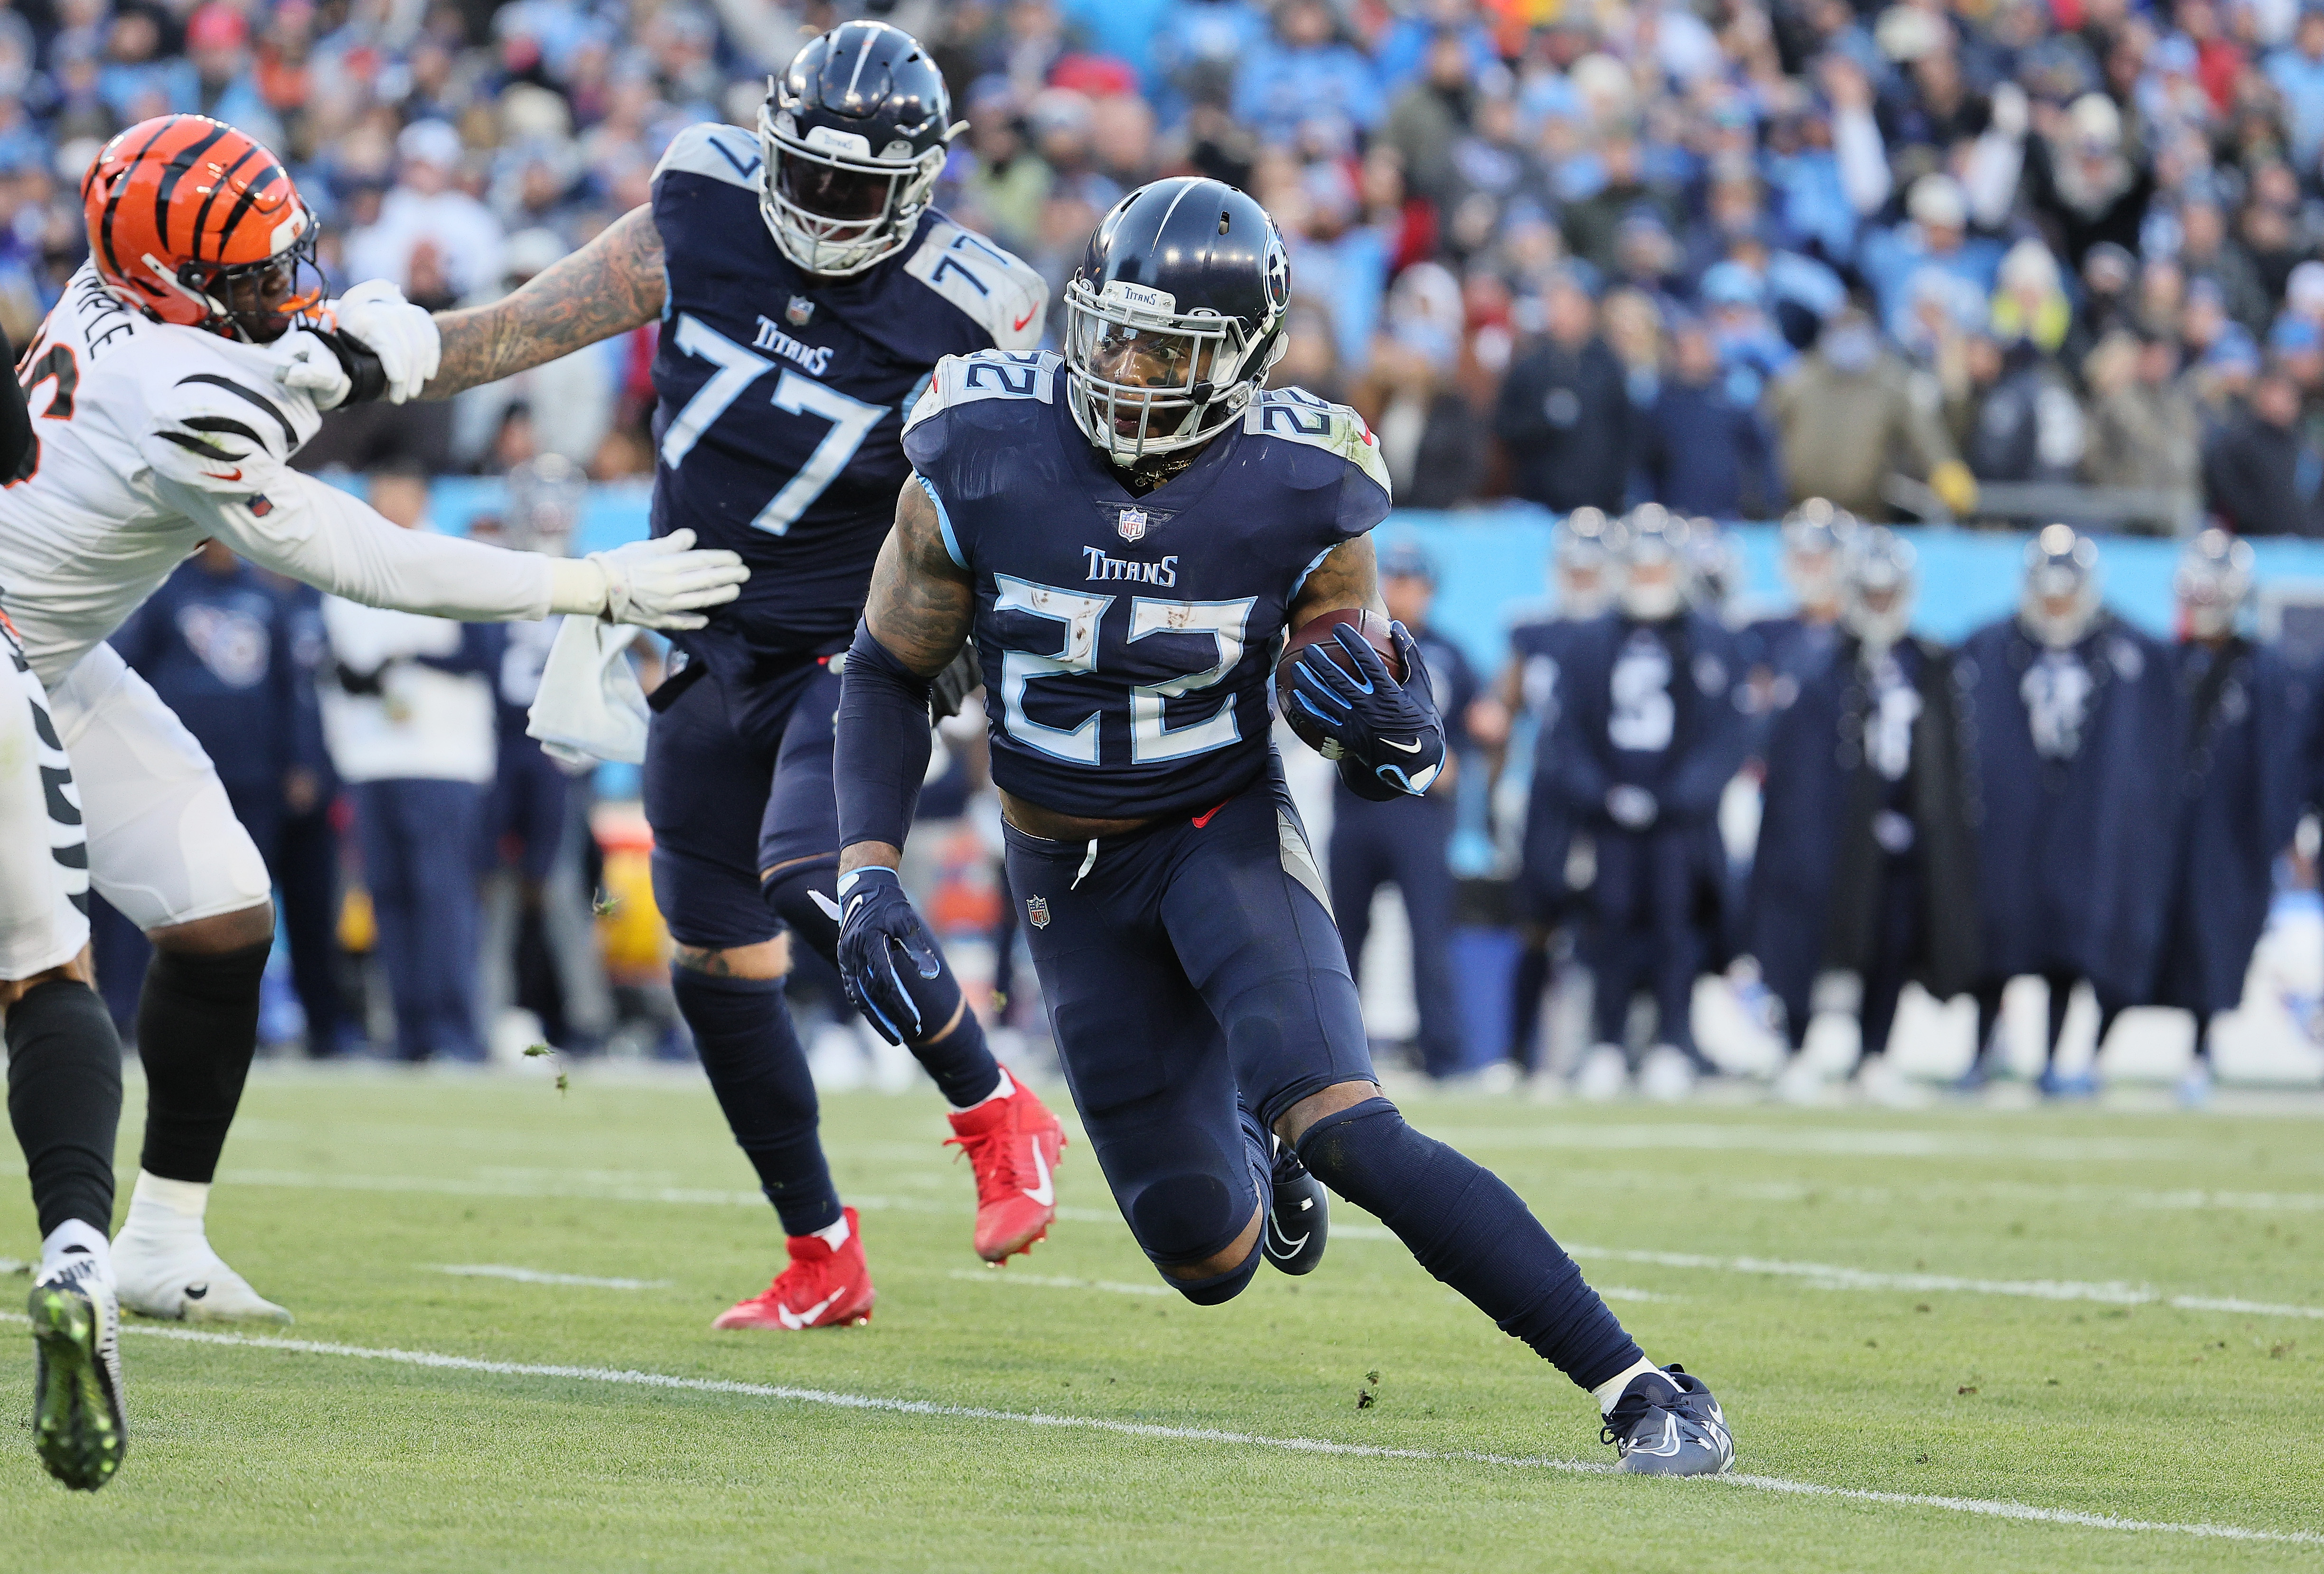 Derrick Henry #22 of the Tennessee Titans runs for a touchdown against the Cincinnati Bengals during the AFC Divisional Playoff at Nissan Stadium on January 22, 2022 in Nashville, Tennessee.